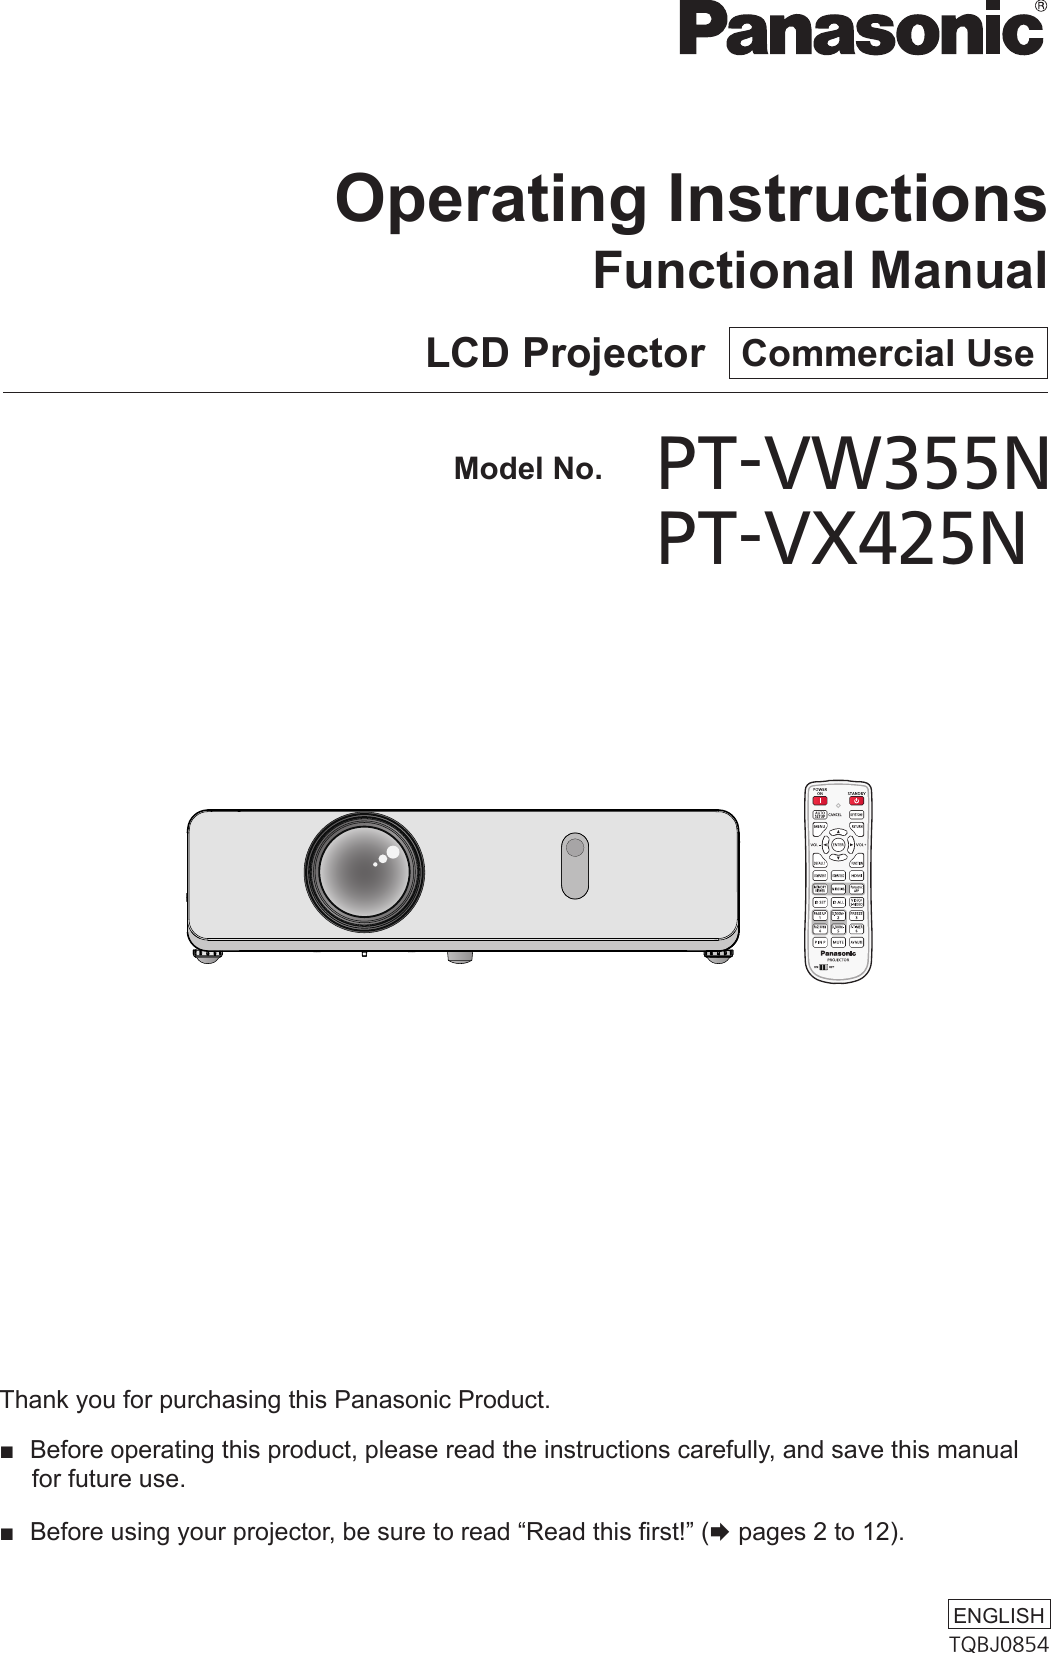 Thank you for purchasing this Panasonic Product. ■ Before operating this product, please read the instructions carefully, and save this manual for future use. ■ Before using your projector, be sure to read “Read this rst!” (x pages 2 to 12).LCD Projector   Commercial UseOperating InstructionsFunctional ManualTQBJ0854ENGLISH  Model No.PT-VW355N    PT-VX425N